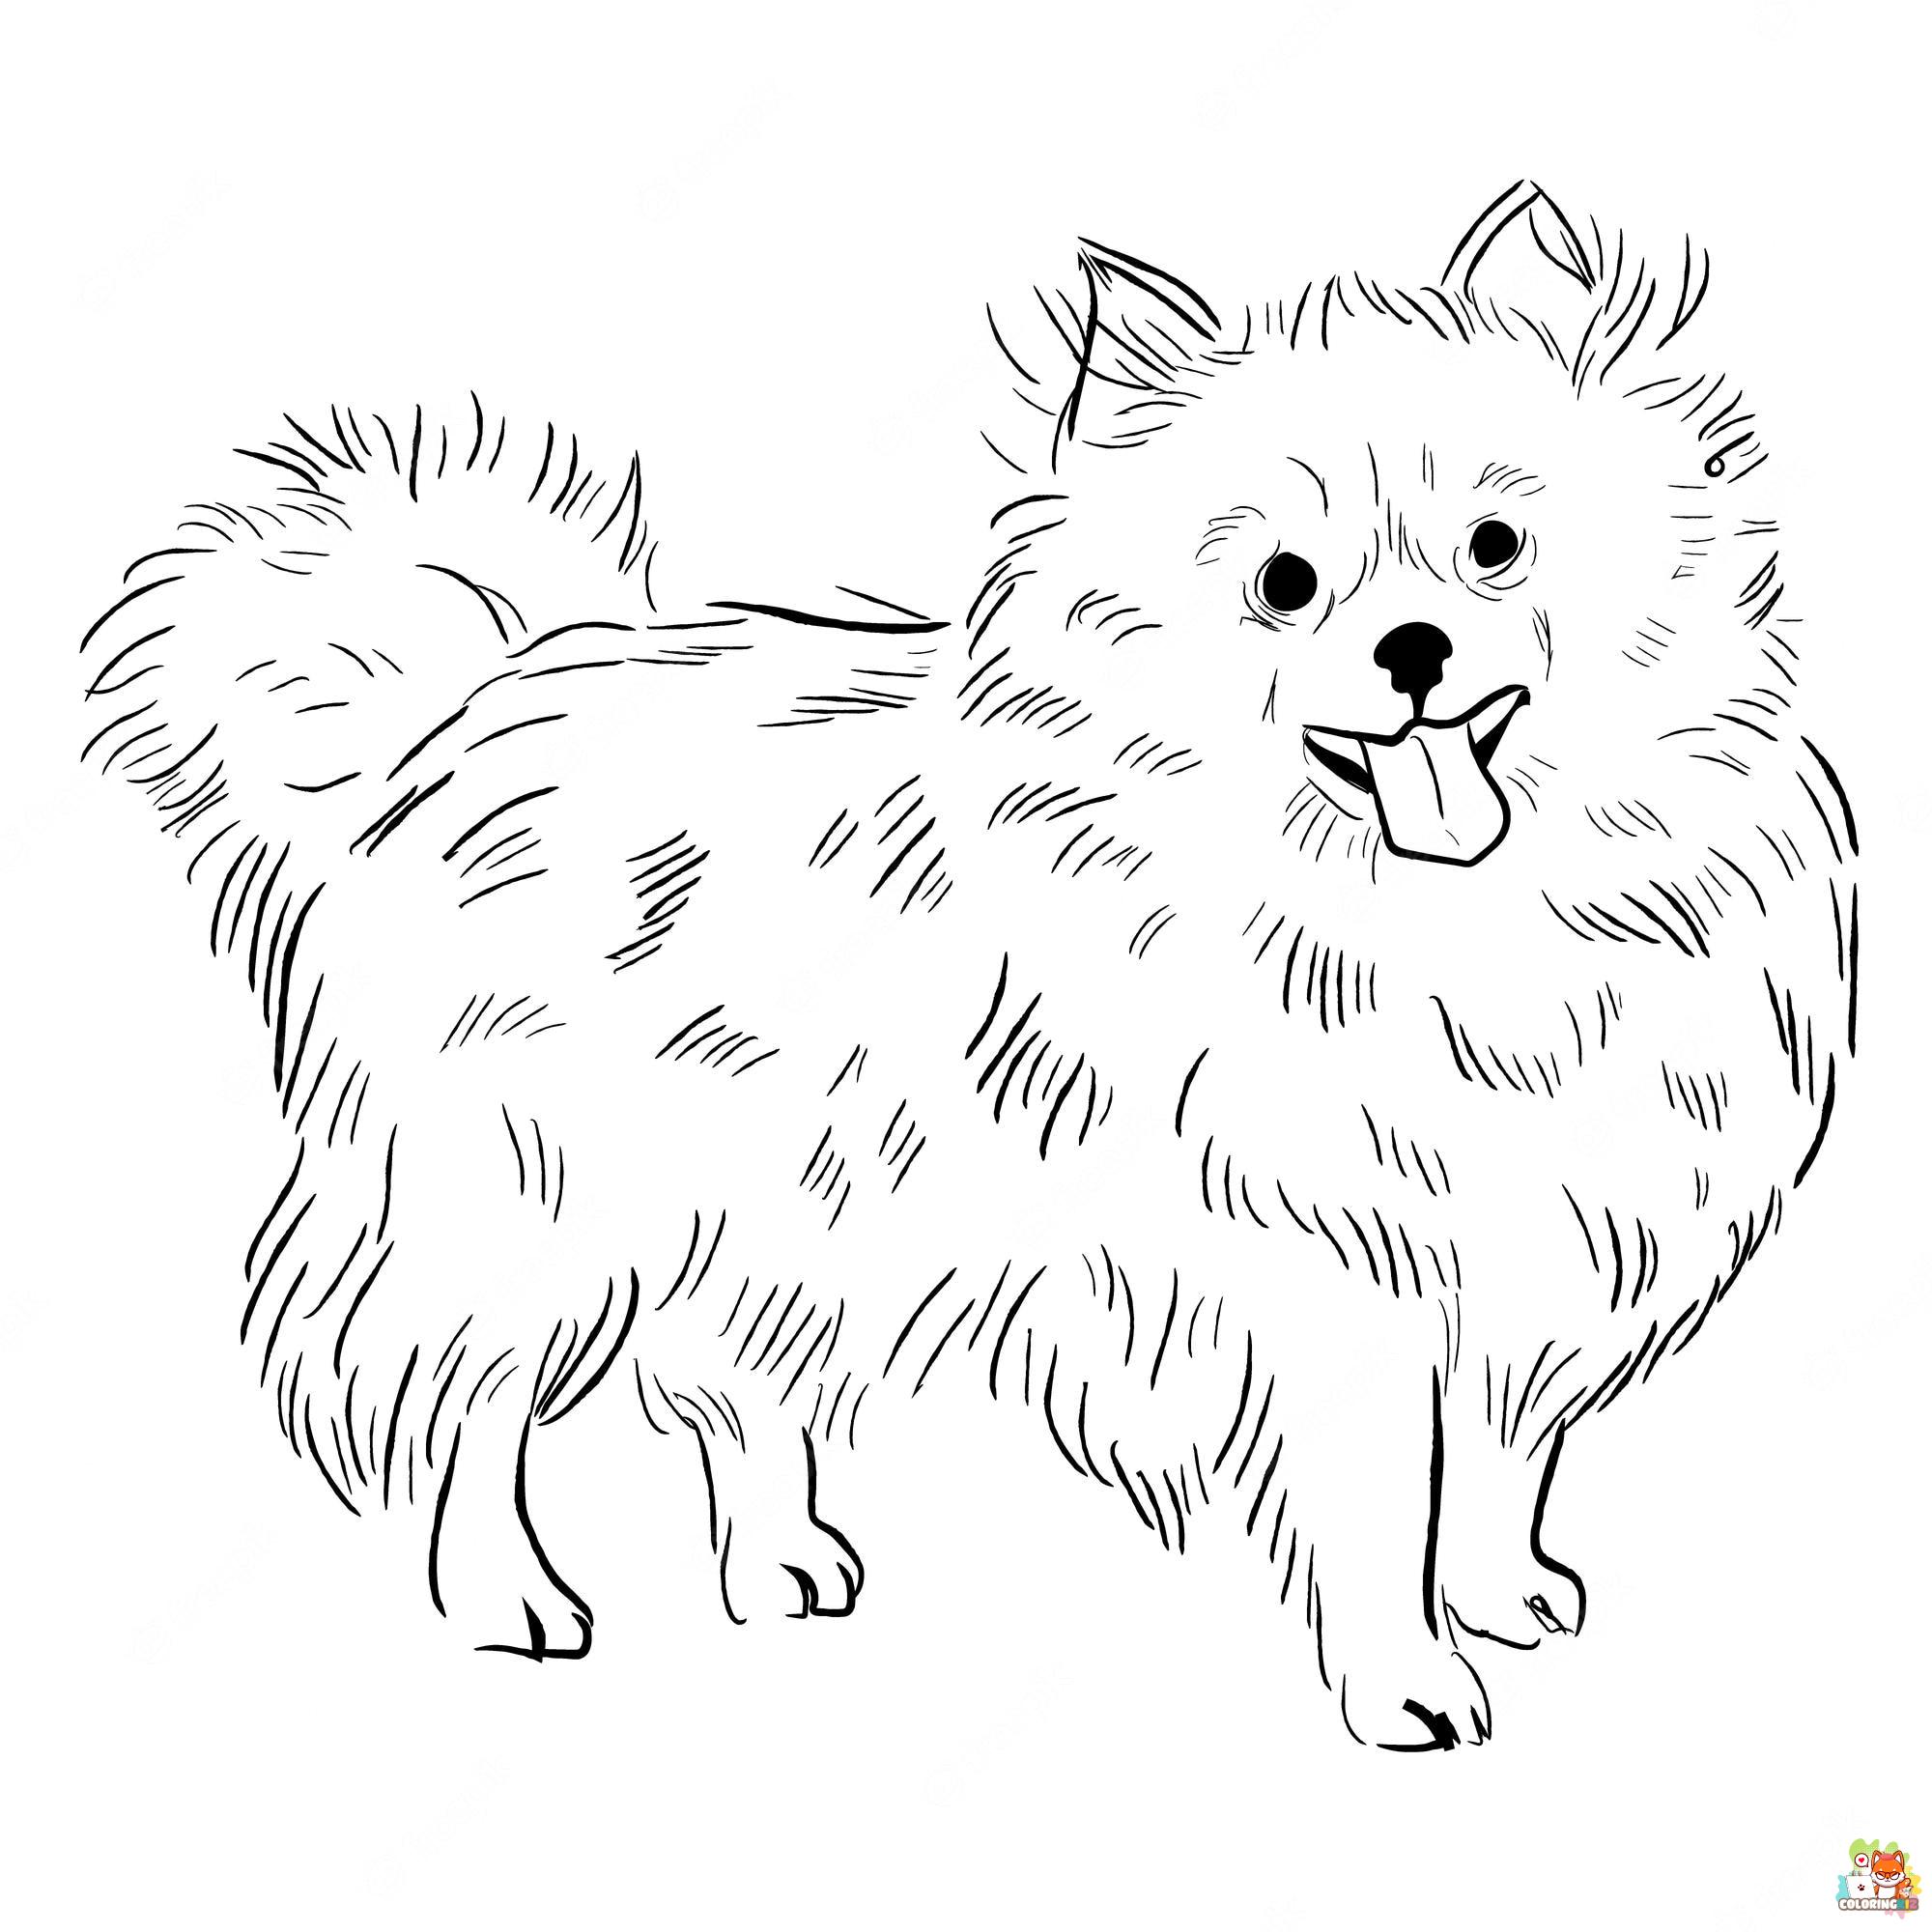 Pomeranian and Chihuahua Coloring Pages 13